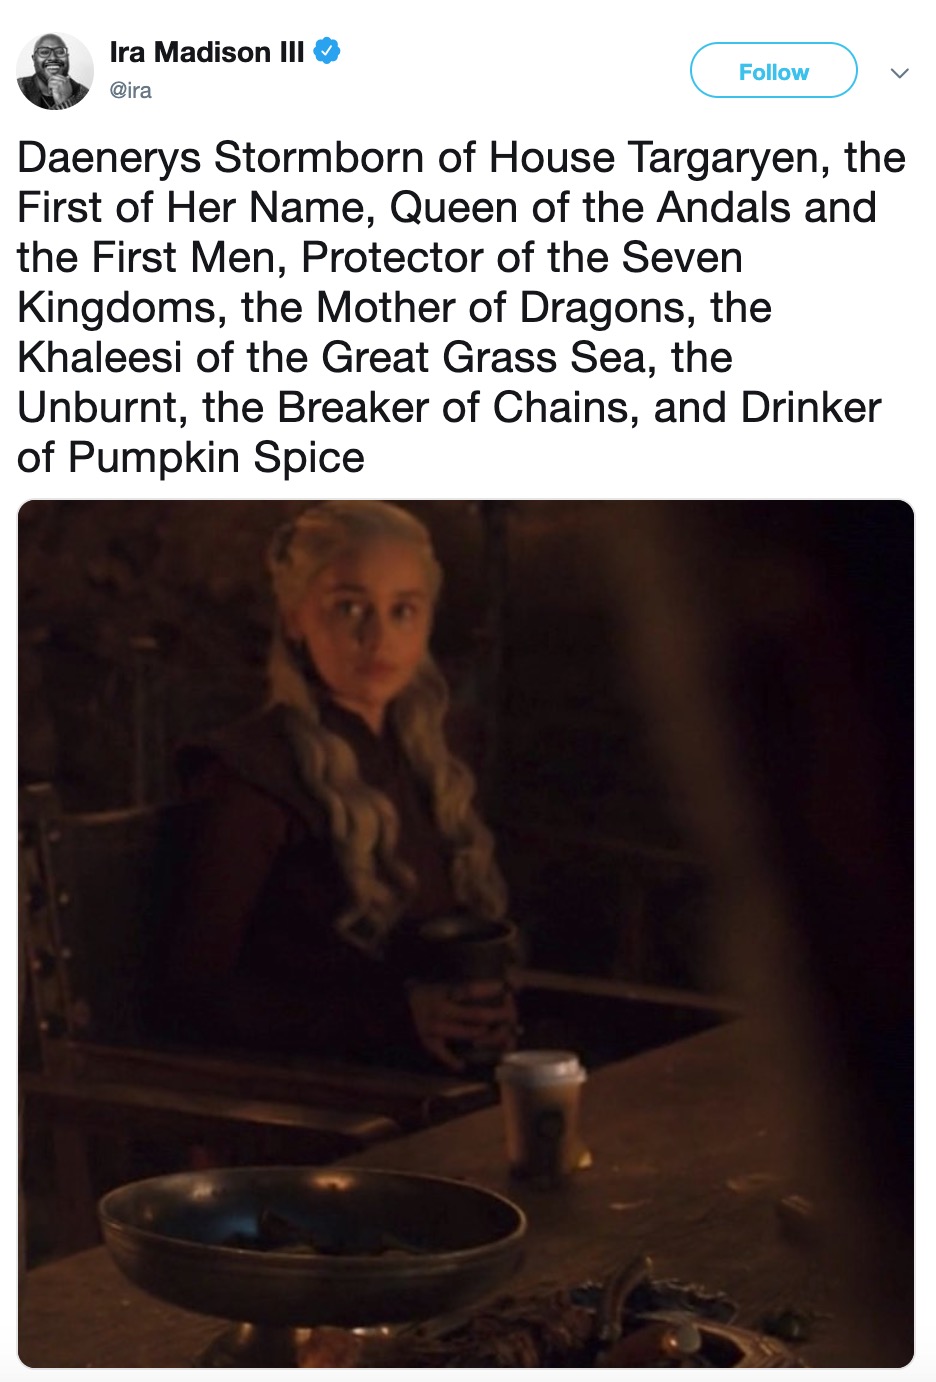 Game of Thrones Starbucks Cup - photo caption - Ira Madison Iii v Daenerys Stormborn of House Targaryen, the First of Her Name, Queen of the Andals and the First Men, Protector of the Seven Kingdoms, the Mother of Dragons, the Khaleesi of the Great Grass 